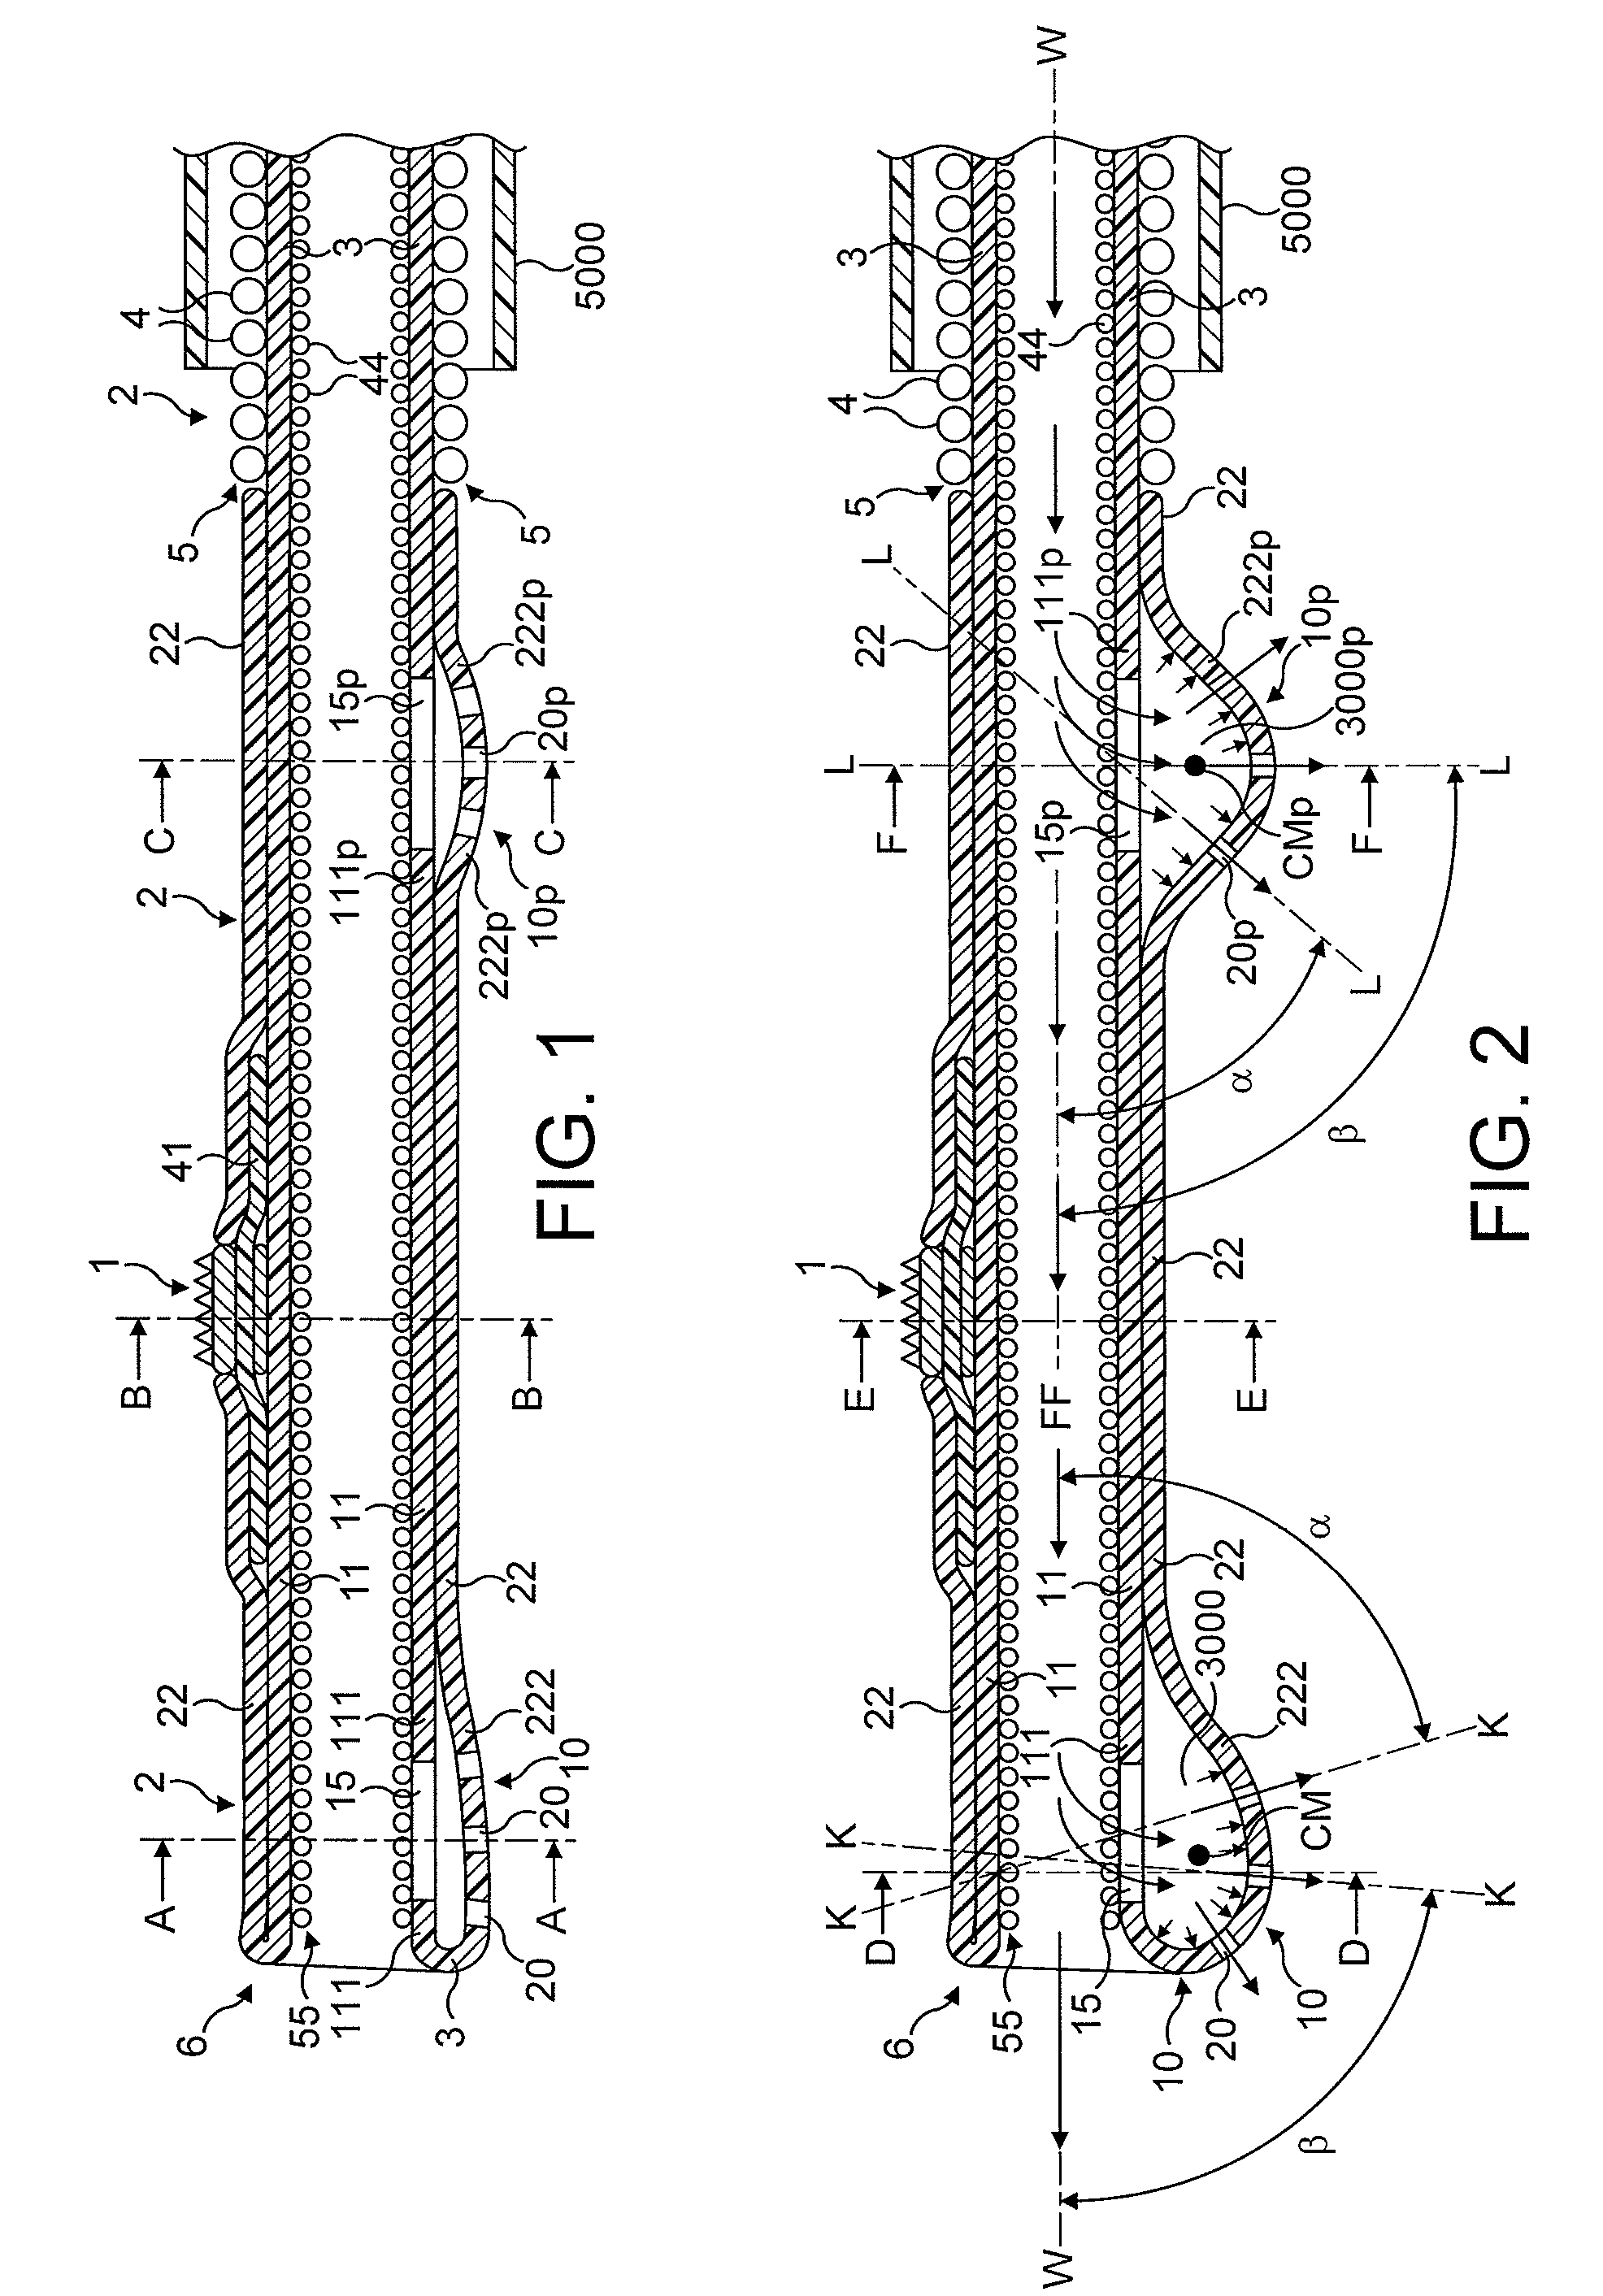 Rotational atherectomy device with fluid inflatable support elements and two torque transmitting coils